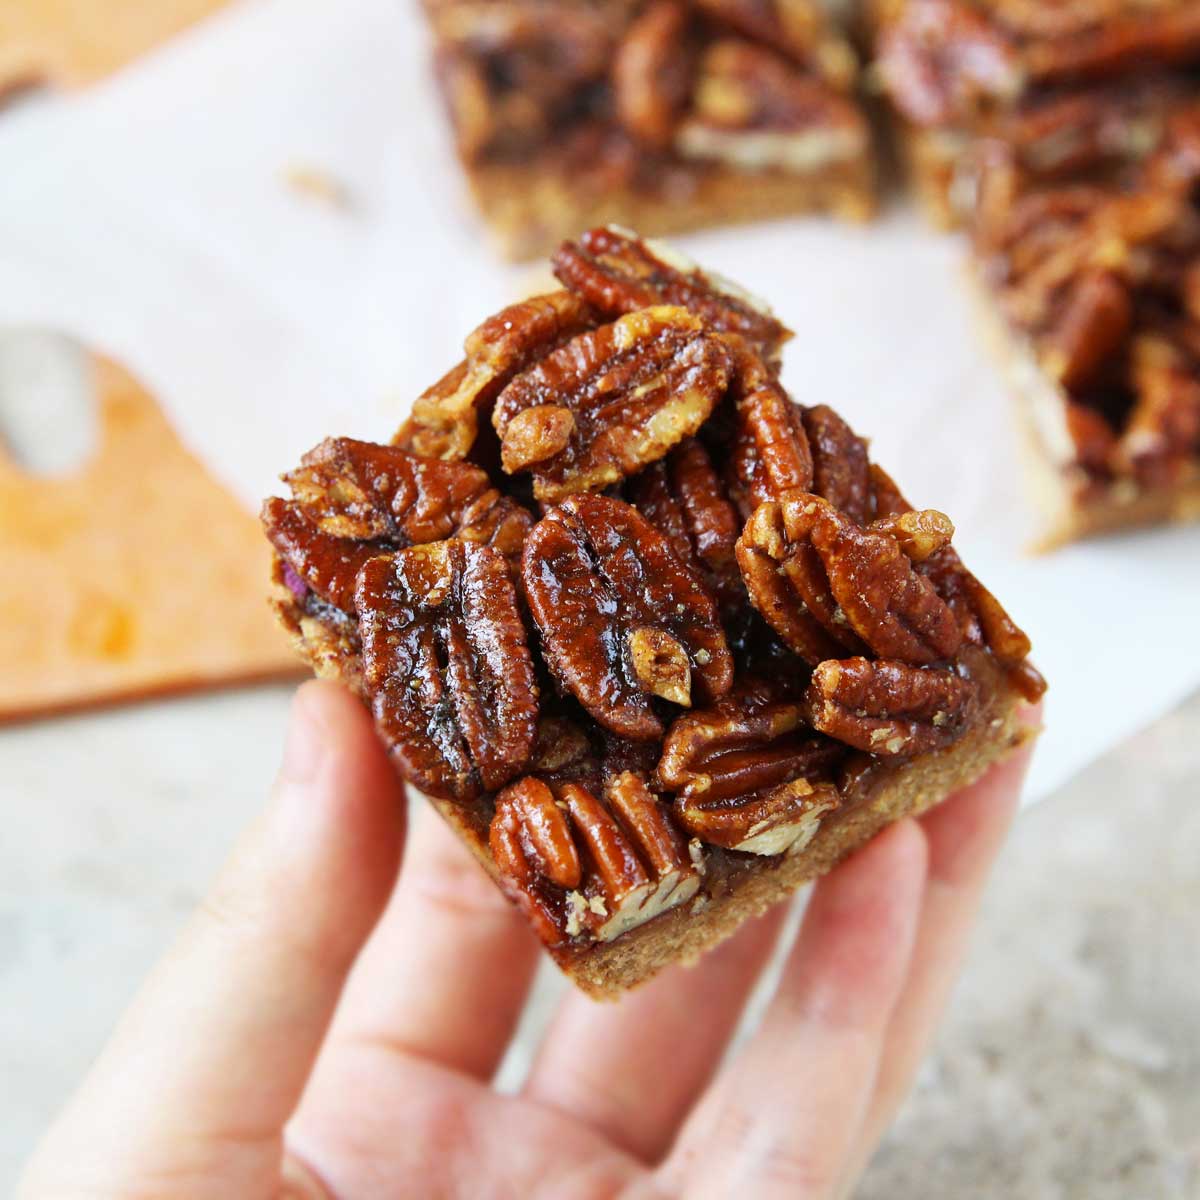 How to Make Vegan Pecan Pie Bars Using Canned Chickpeas - Molasses Pumpkin Bread With Pecan